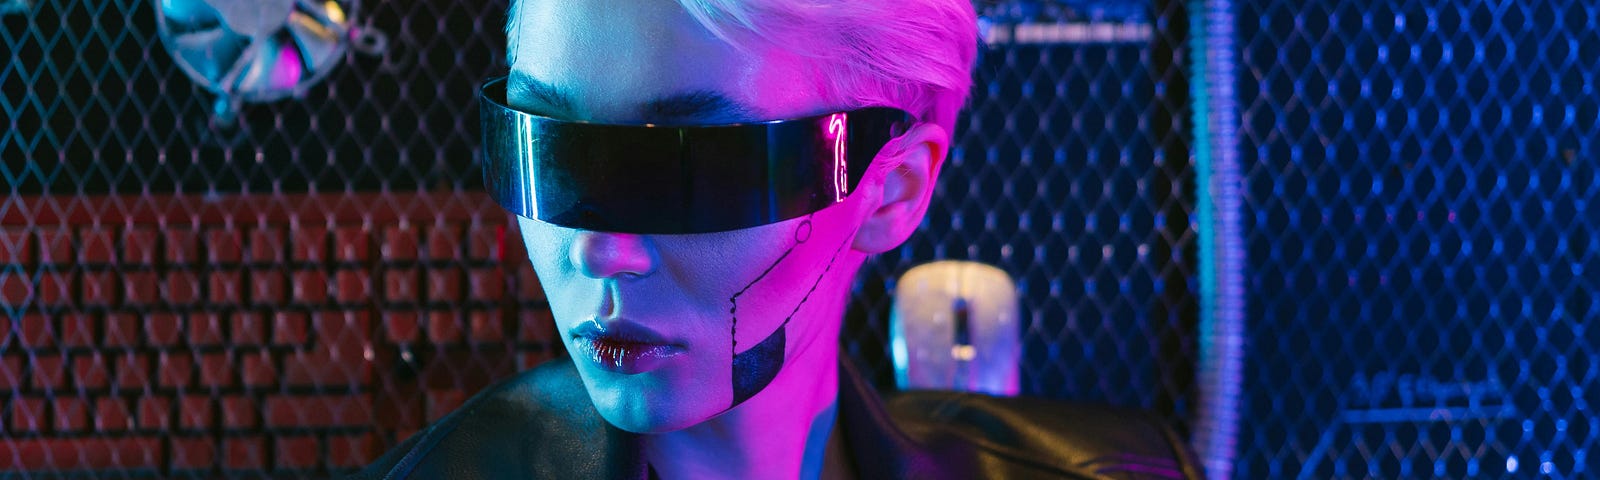 A woman with short, blond hair, poses in  black futuristic eyewear. She’s wearing a black leather jacket with symmetrically lined facial makeup on her cheek. There is a red keyboard behind a mesh fence in the background, and the image has a slight pink glow.